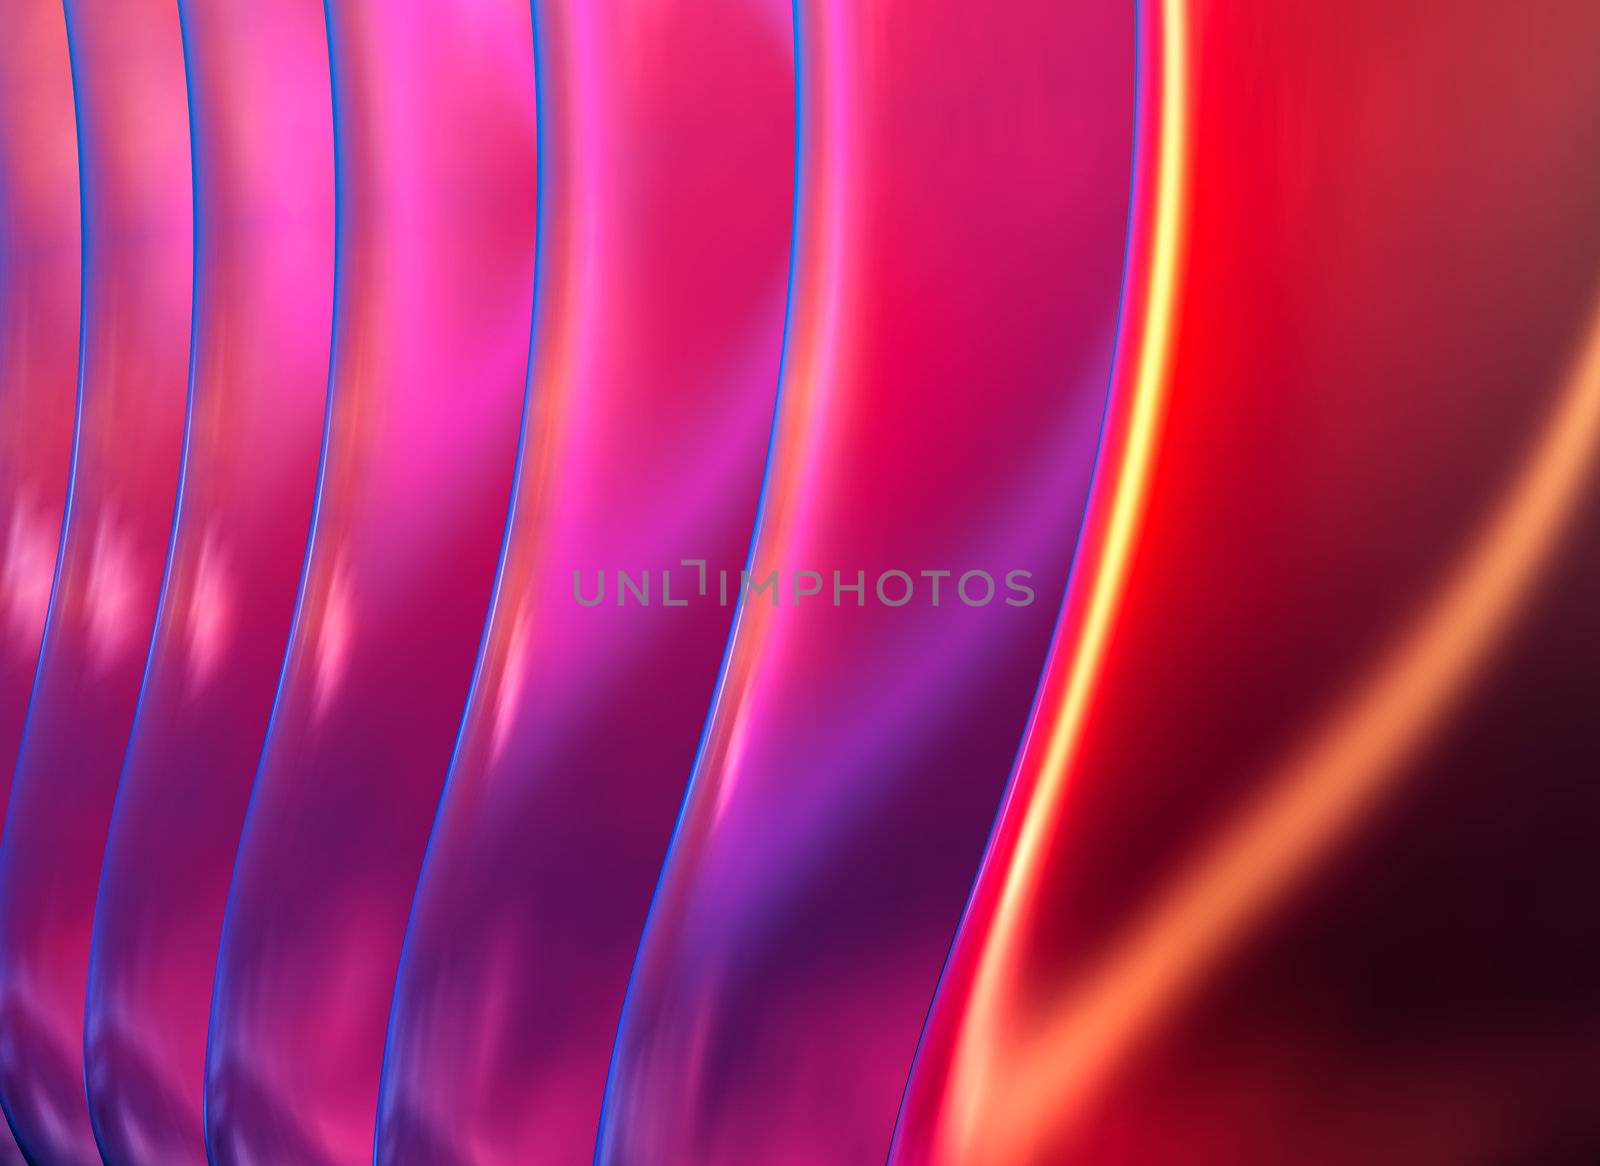 An electric abstract background in vivid magenta and orange-red colors.